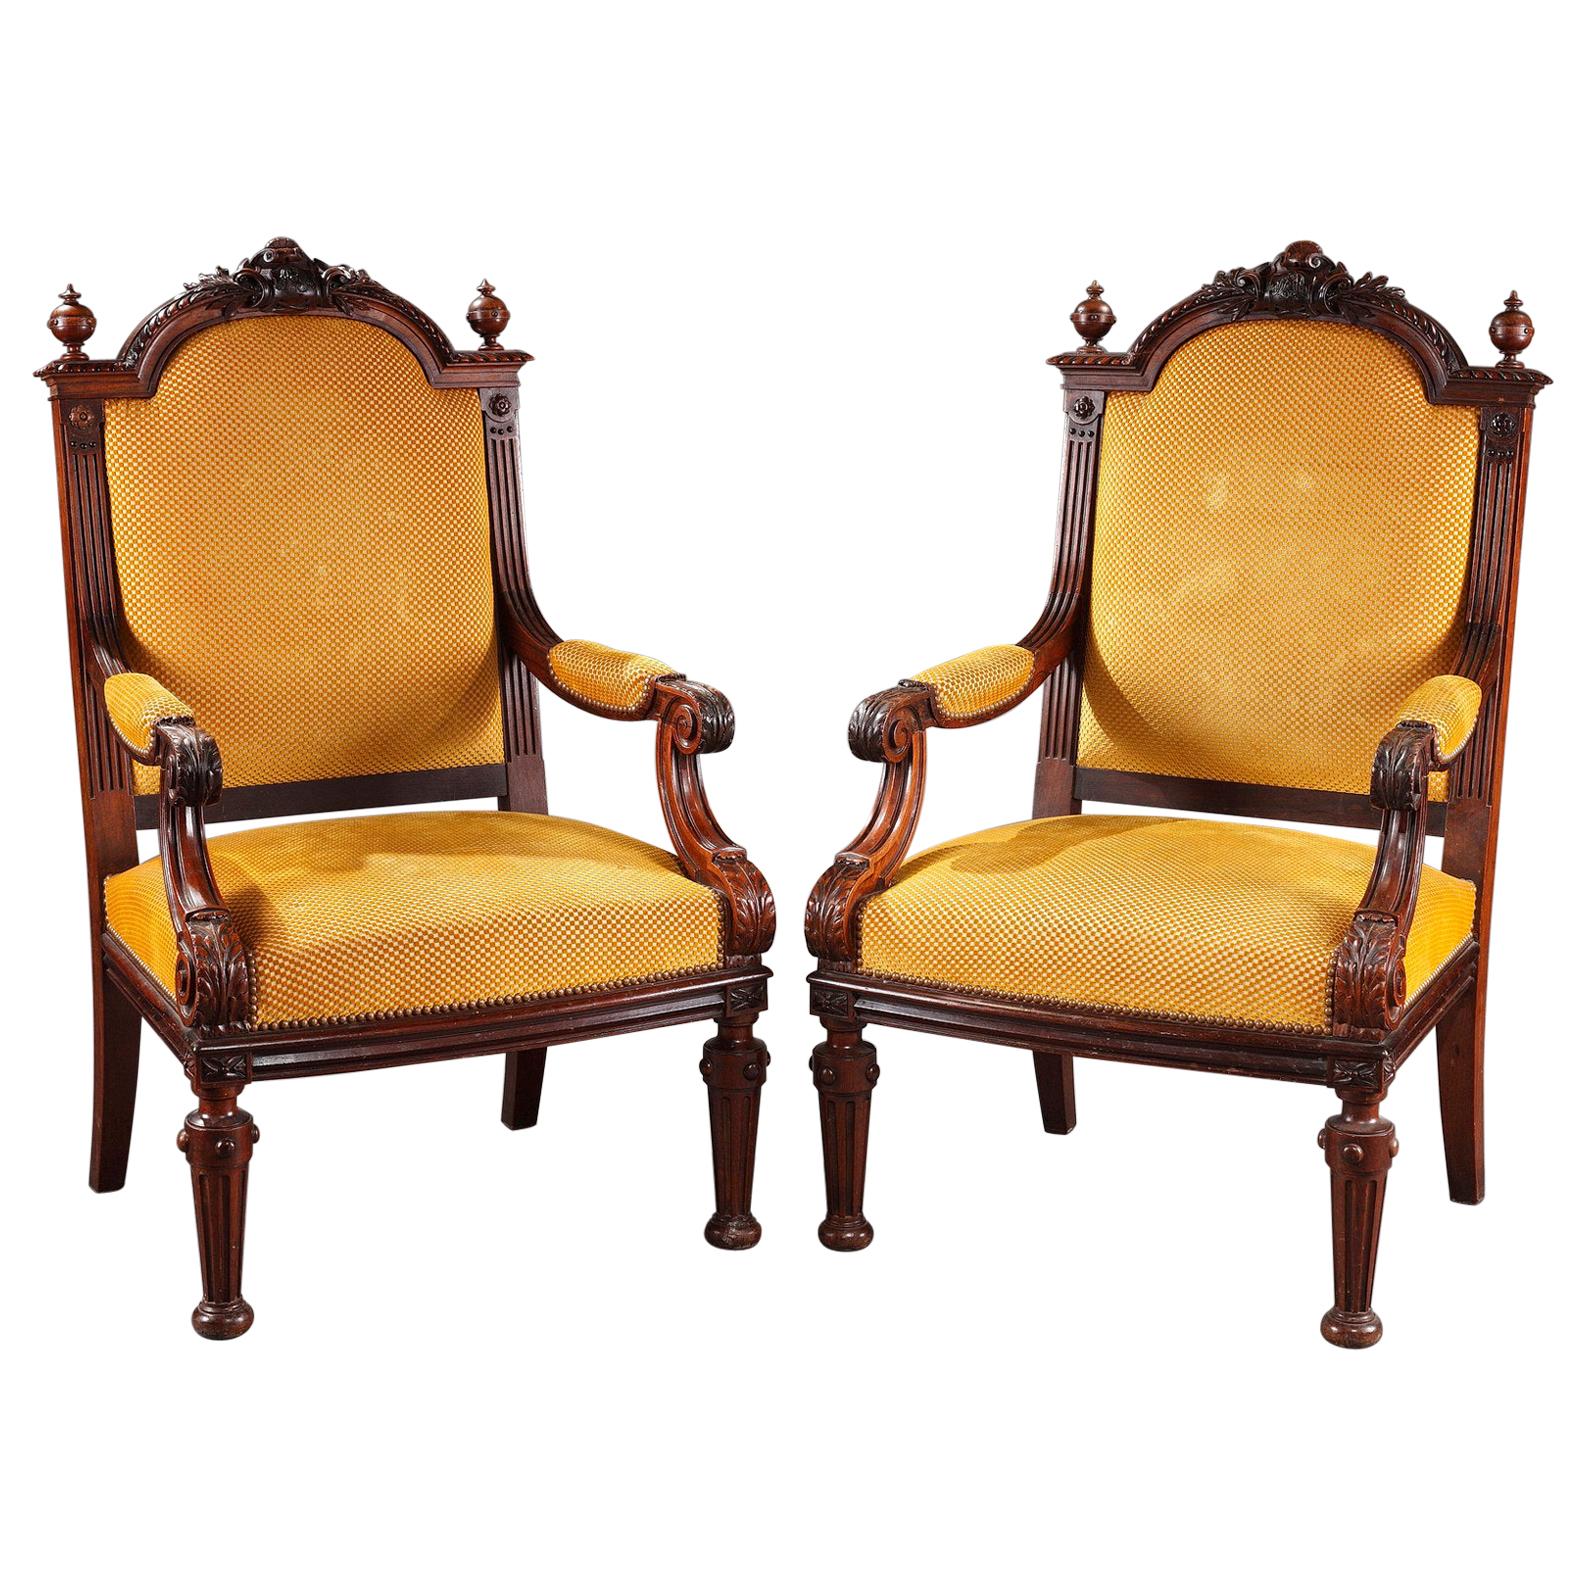 Pair of Armchairs Attributed to H.A. Fourdinois, France, c1870